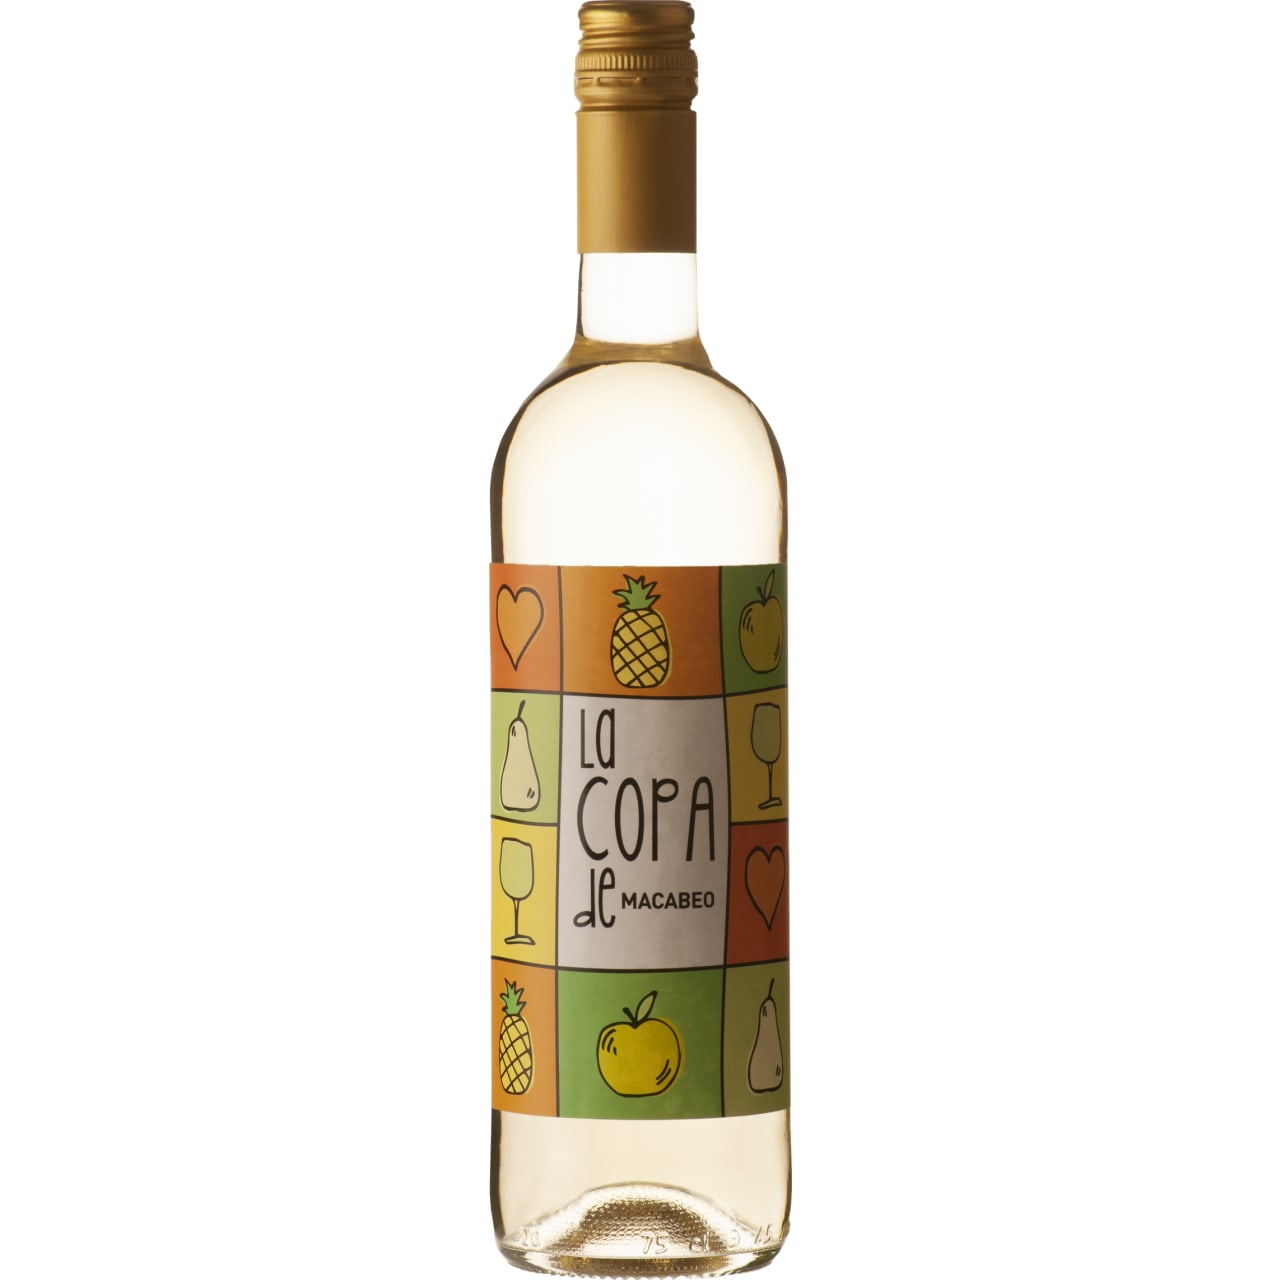 A fresh and herbaceous white wine.